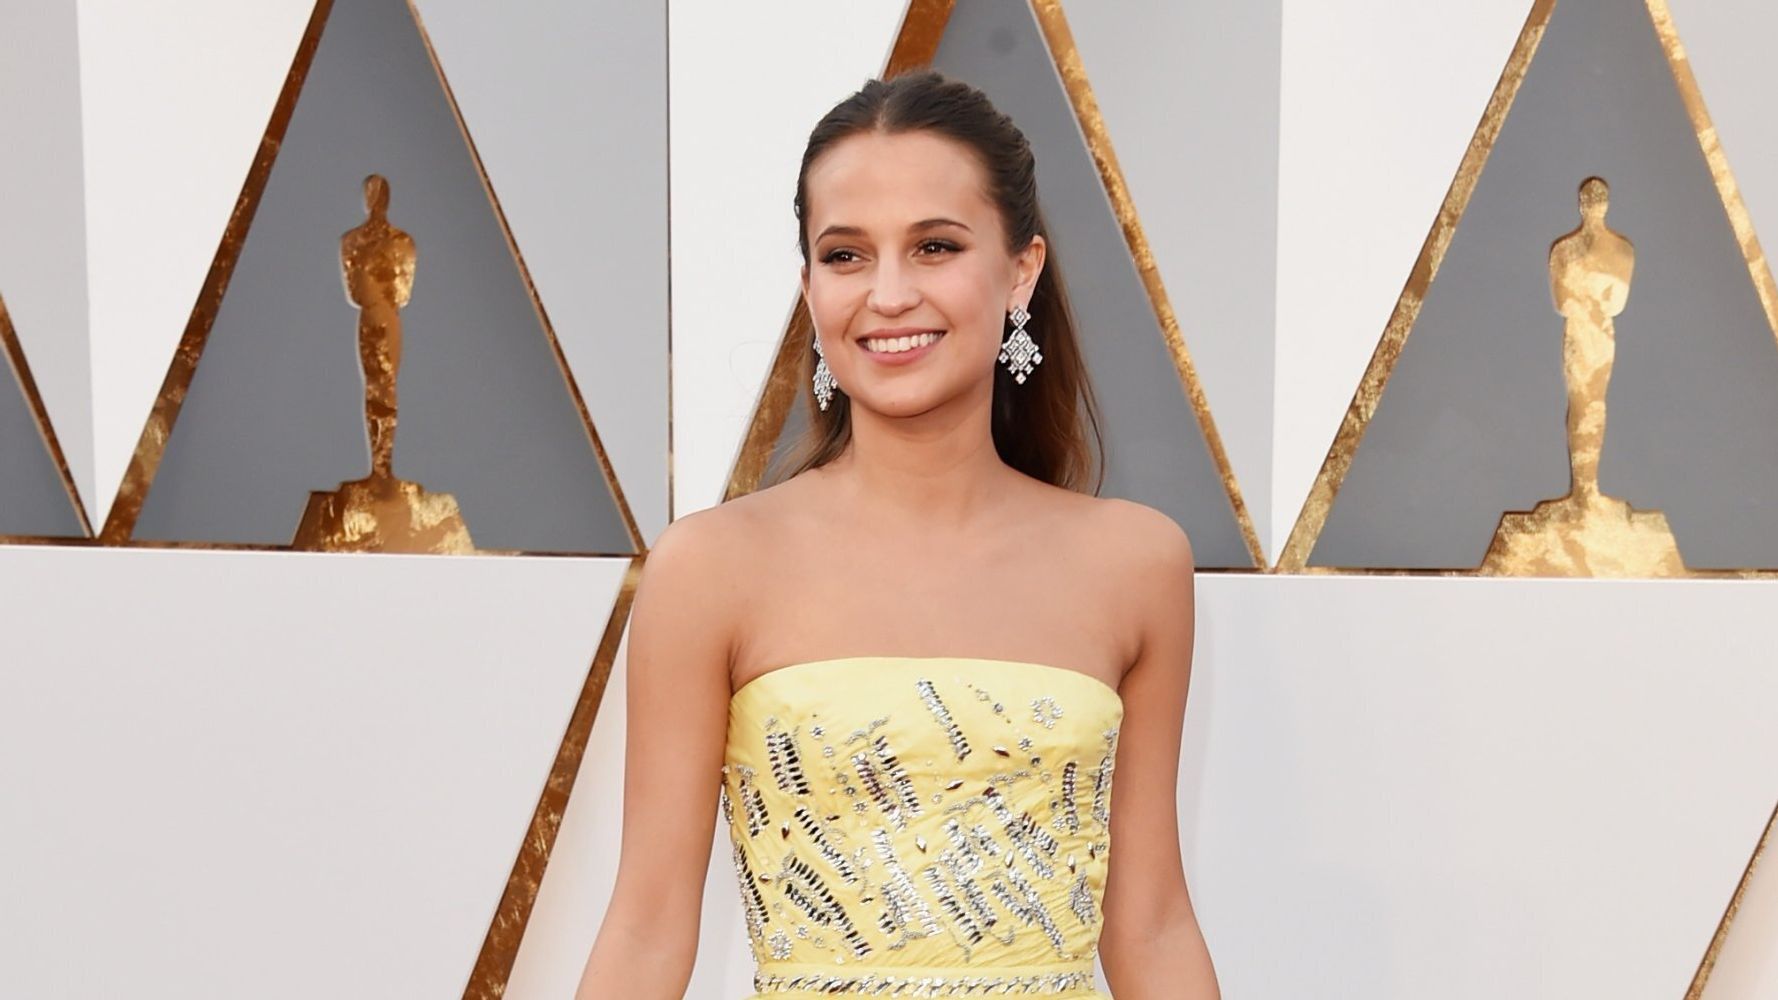 Alicia Vikander on stage at the 2016 Oscars wearing Louis Vuitton, Louis Vuitton  LV Trainer Grey Sneaker